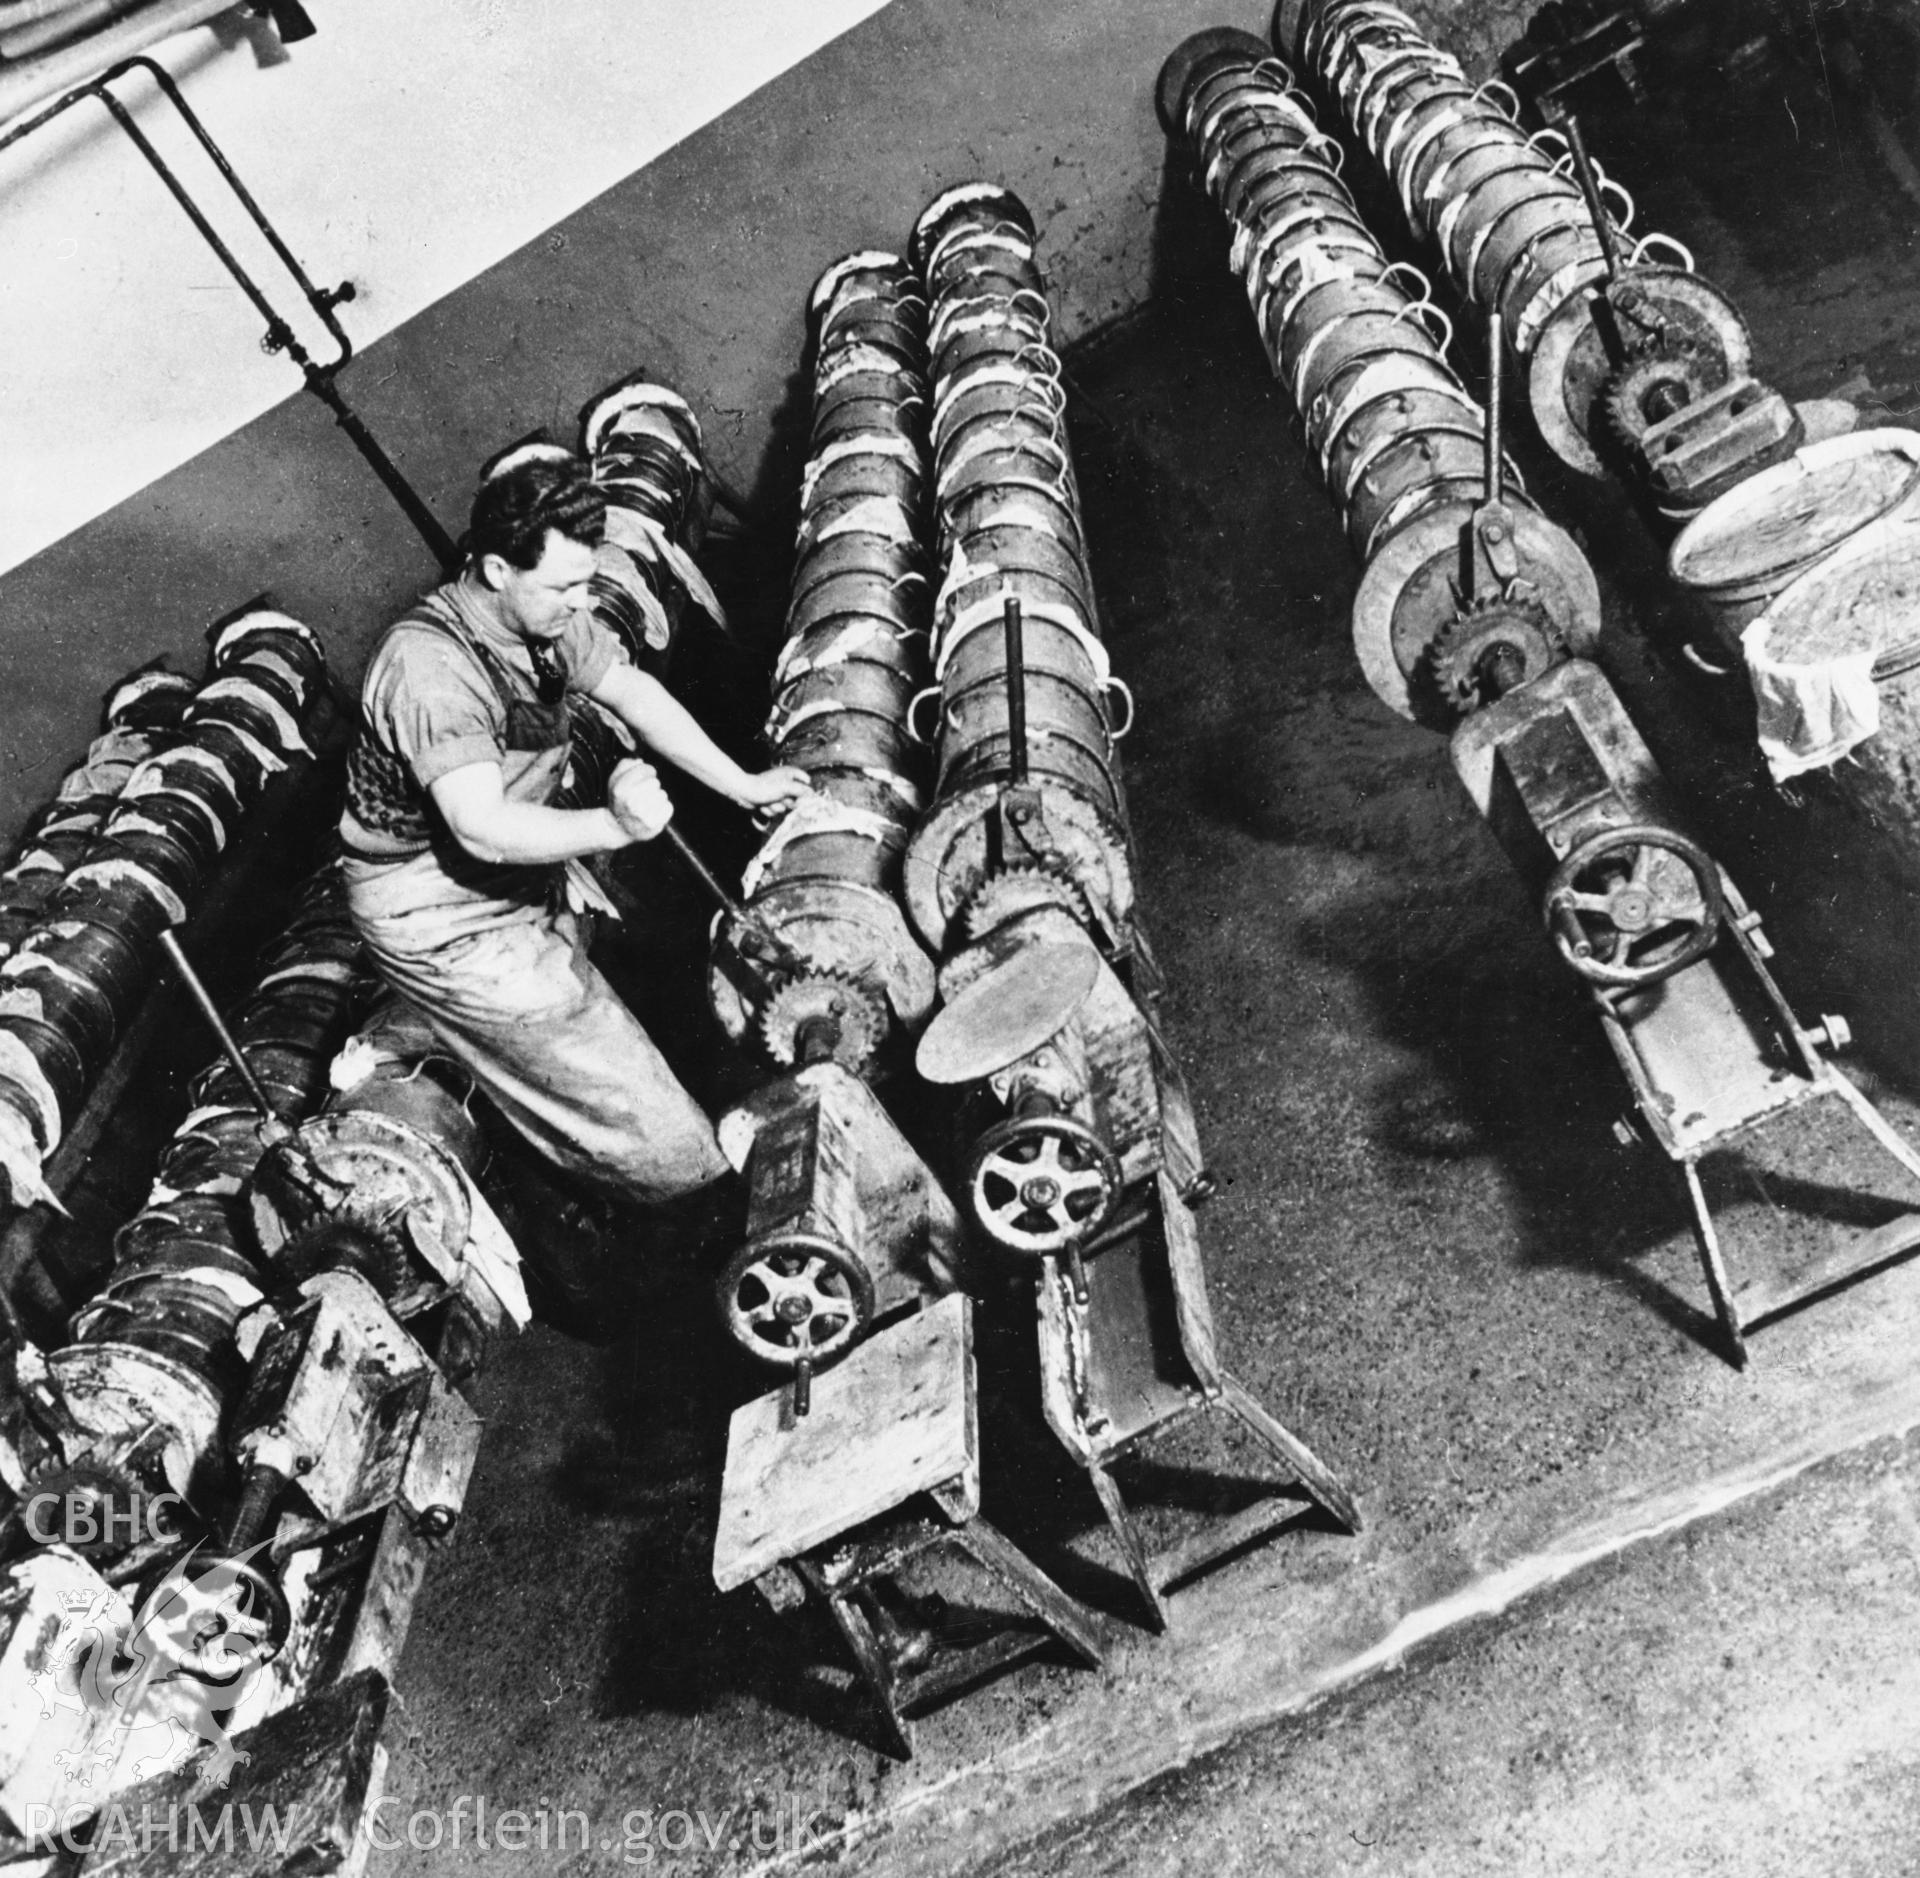 Copy of a pre-1950 photo showing metal moulds used in cheese production